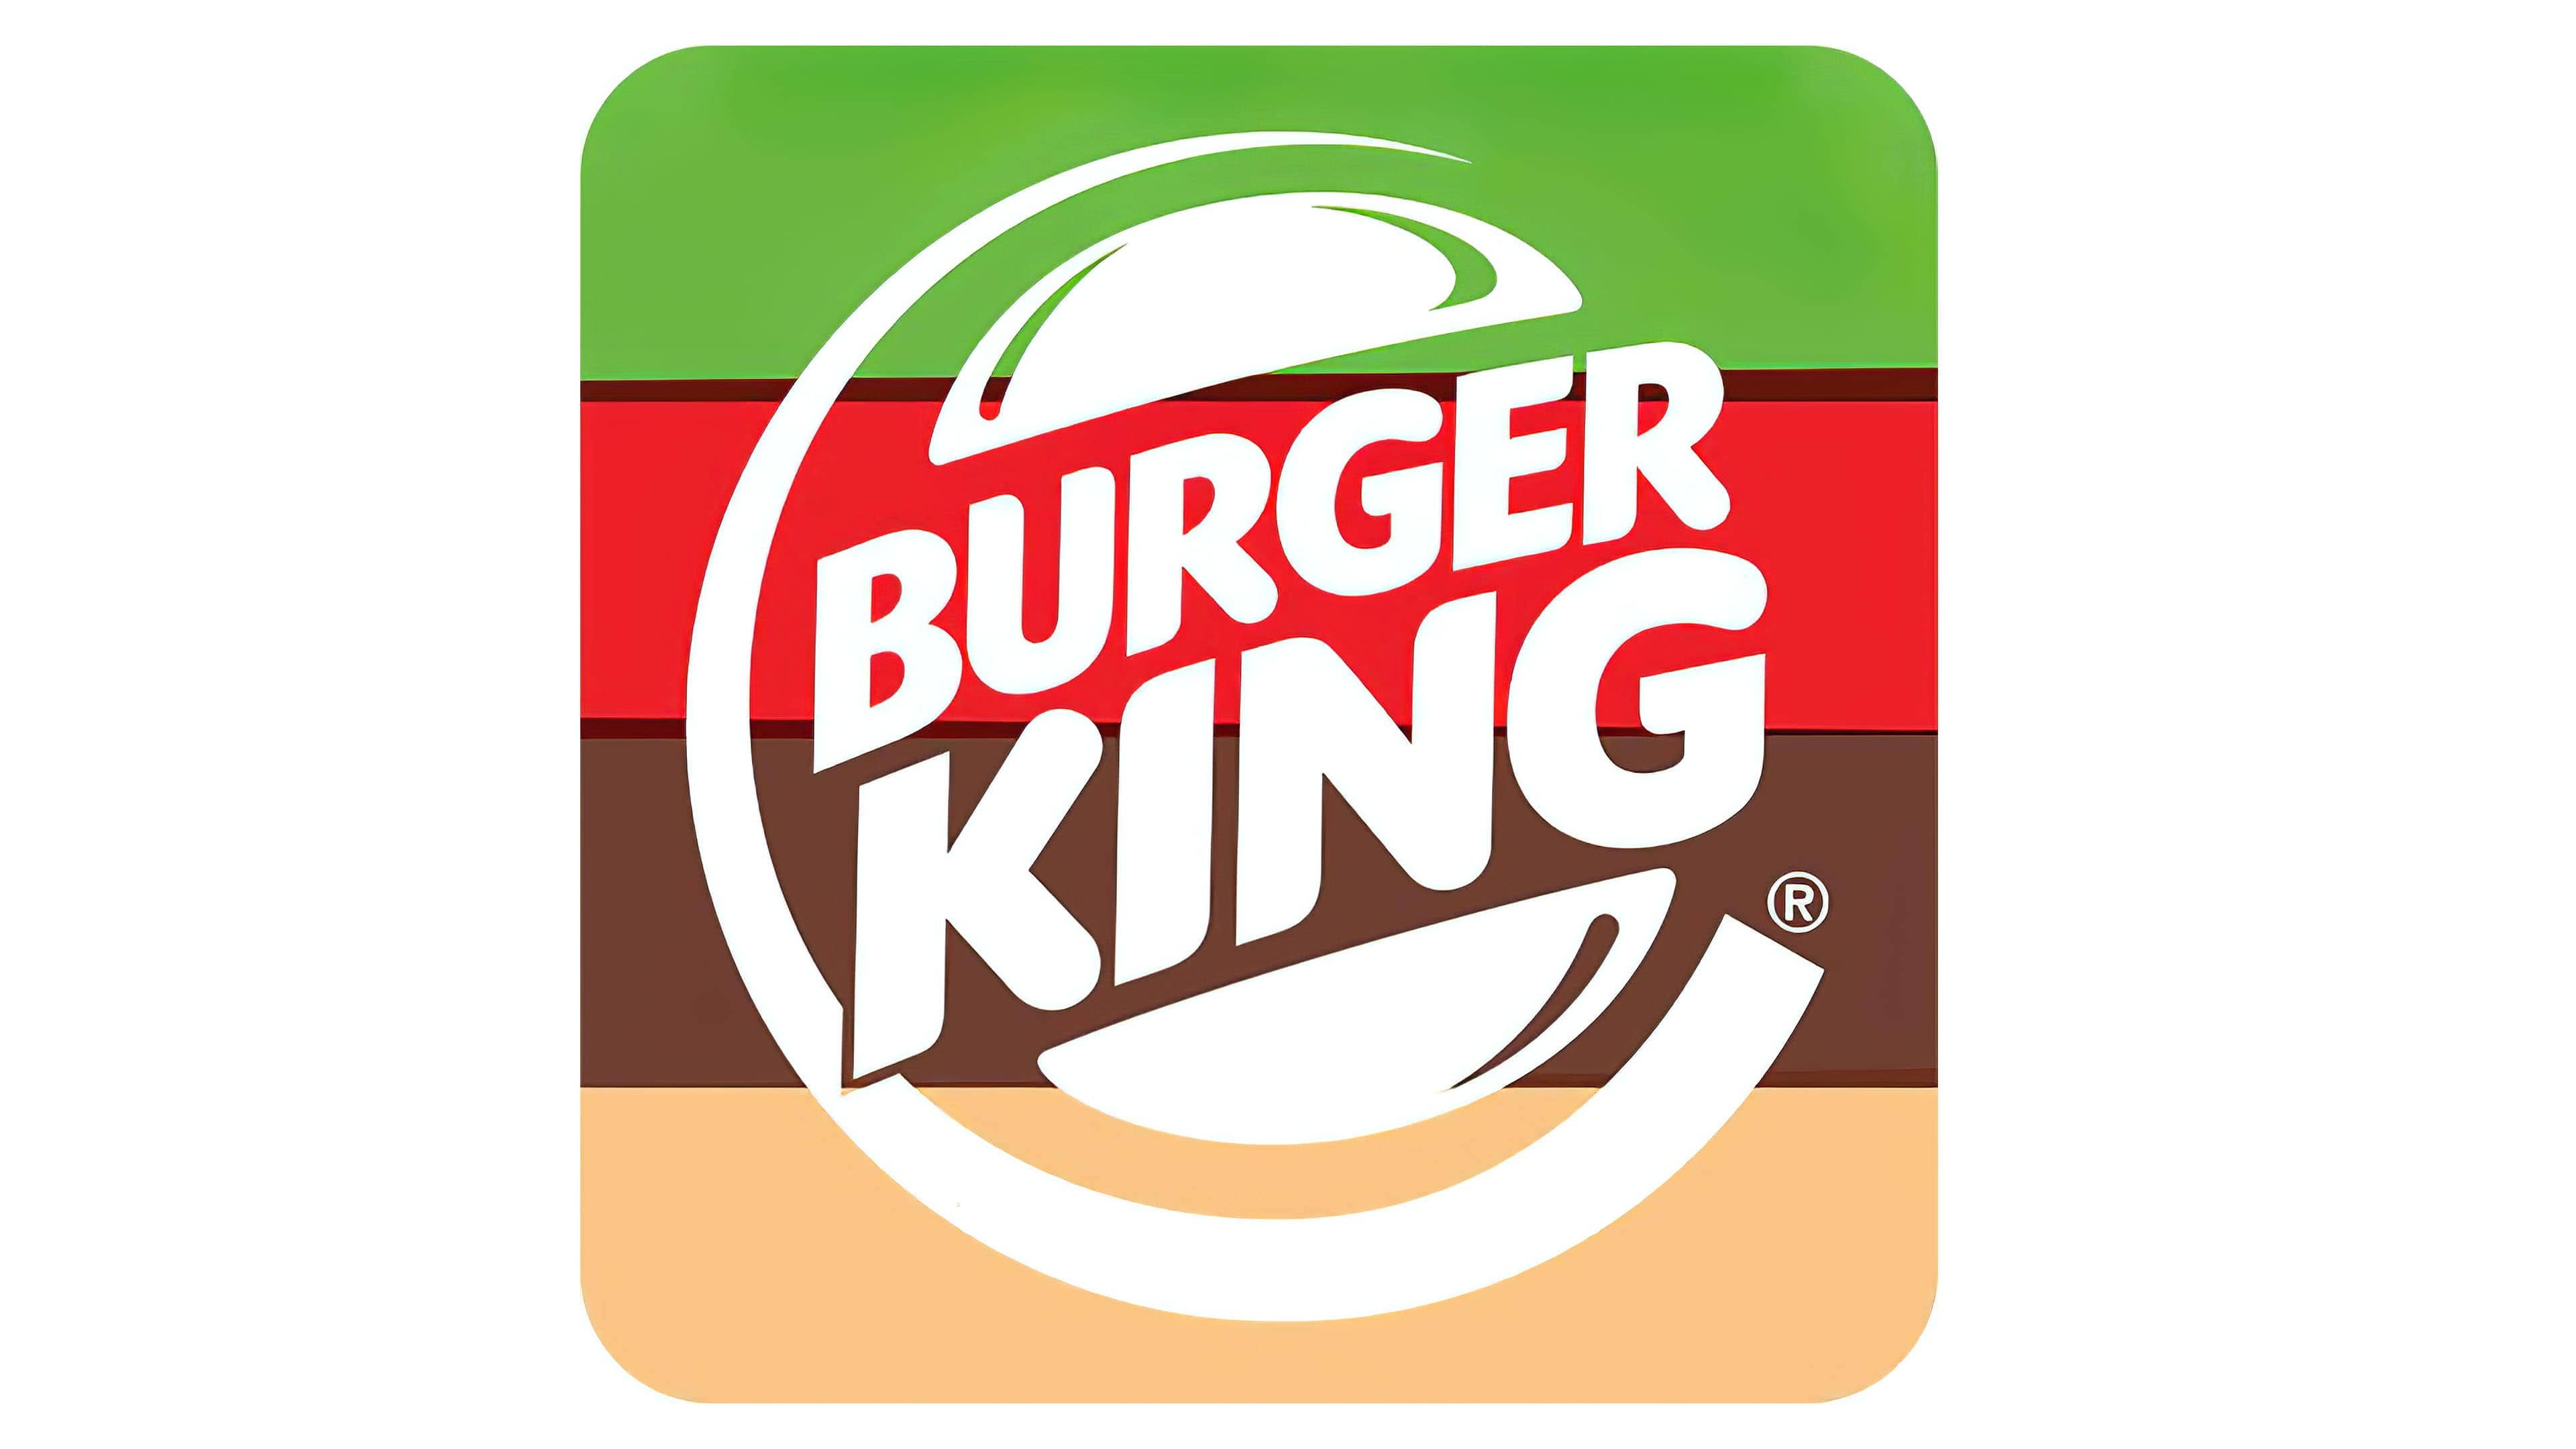 Burger King Logo The Most Famous Brands And Company Logos In The World